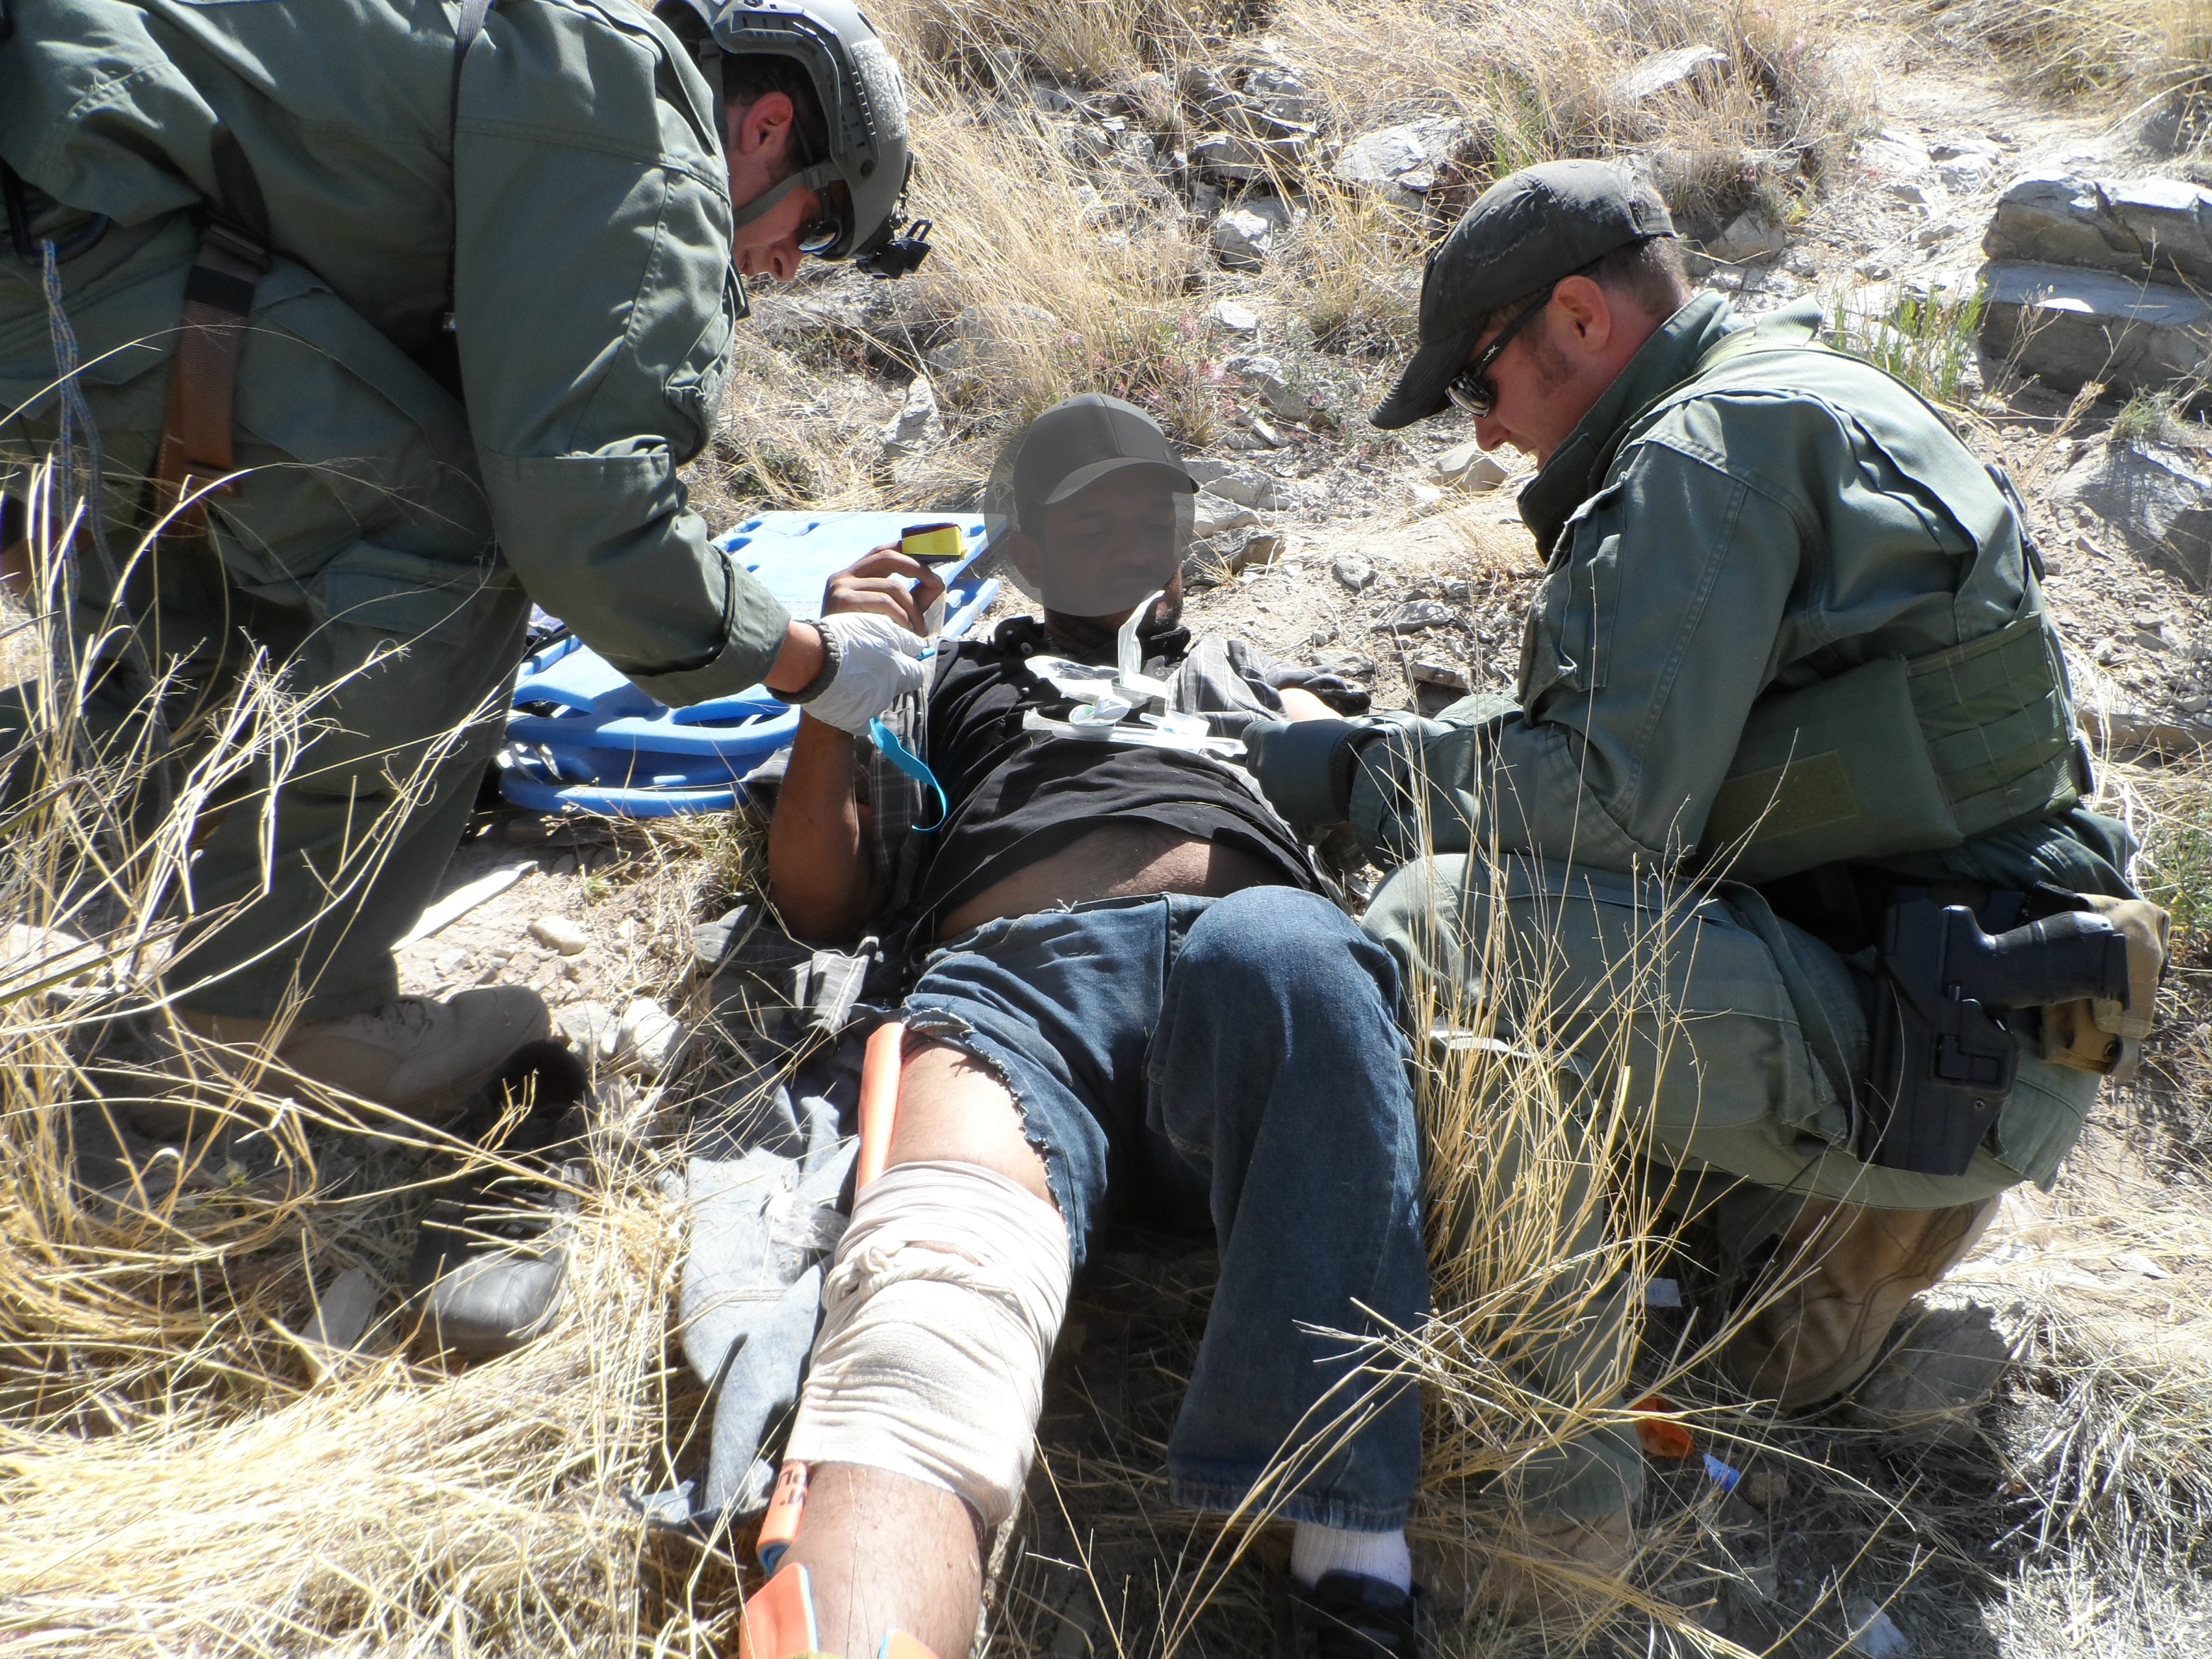 Border Patrol Search Trauma and Rescue (BORSTAR) team render first aid to an injured migrant.